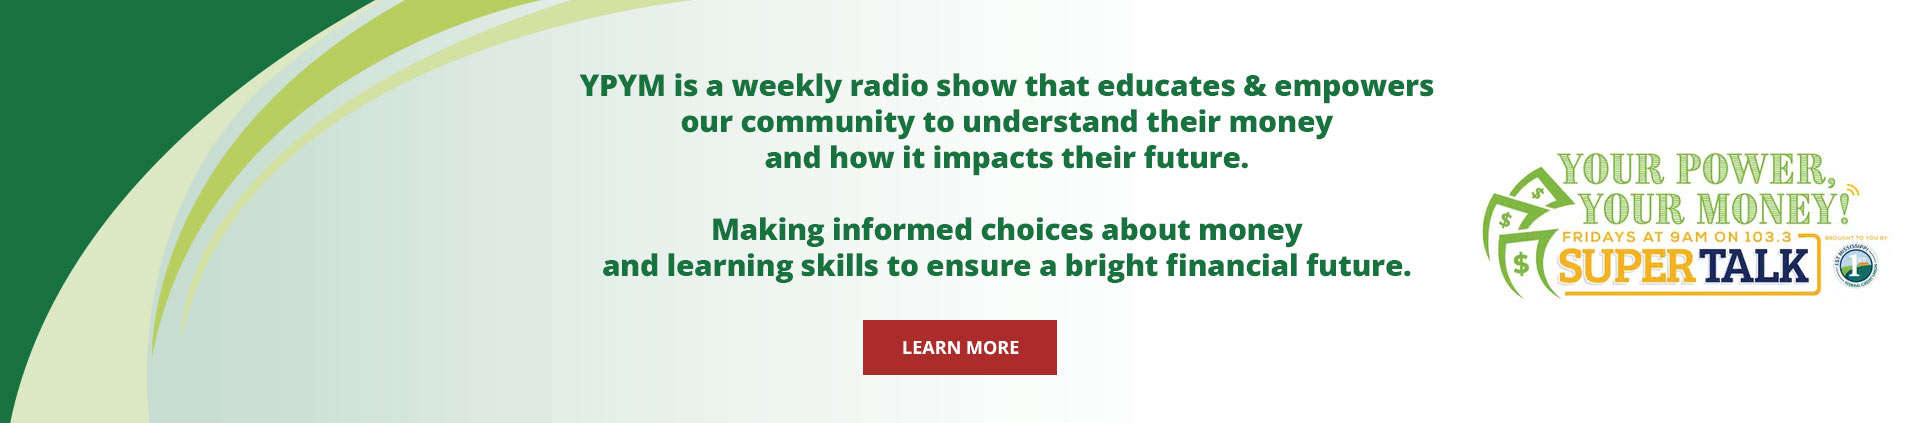 YPYM is a weekly radio show that educates & empowers our community to understand their money and how it impacts their future. Making informed choices about money and learning skills to ensure a bright financial future.